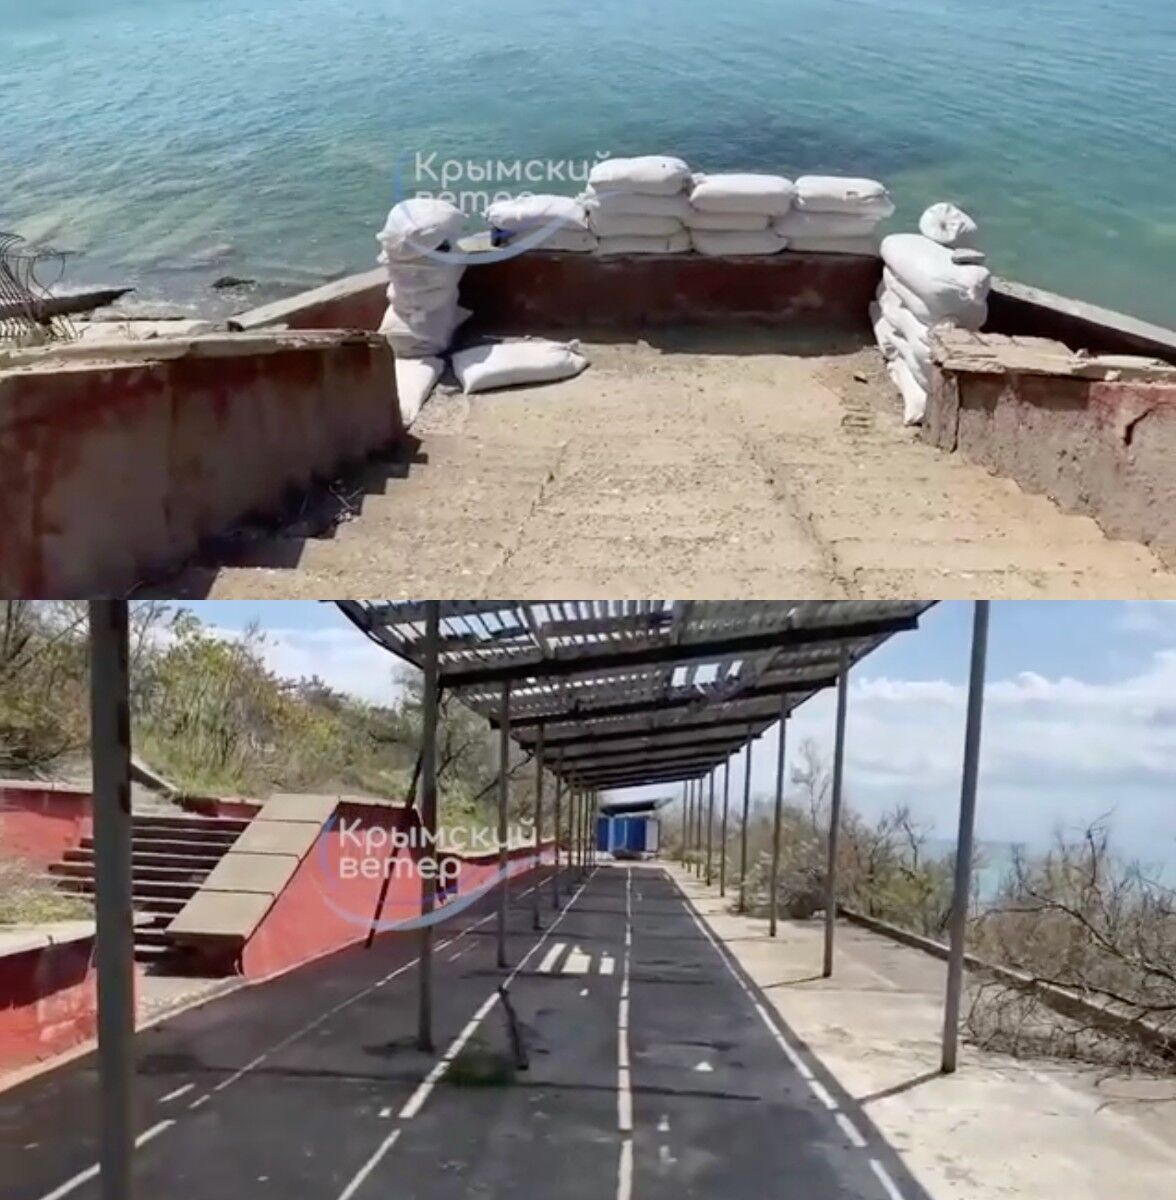 Like after the apocalypse. A video from a popular resort in Crimea, which was visited by the Russian military, was shown online